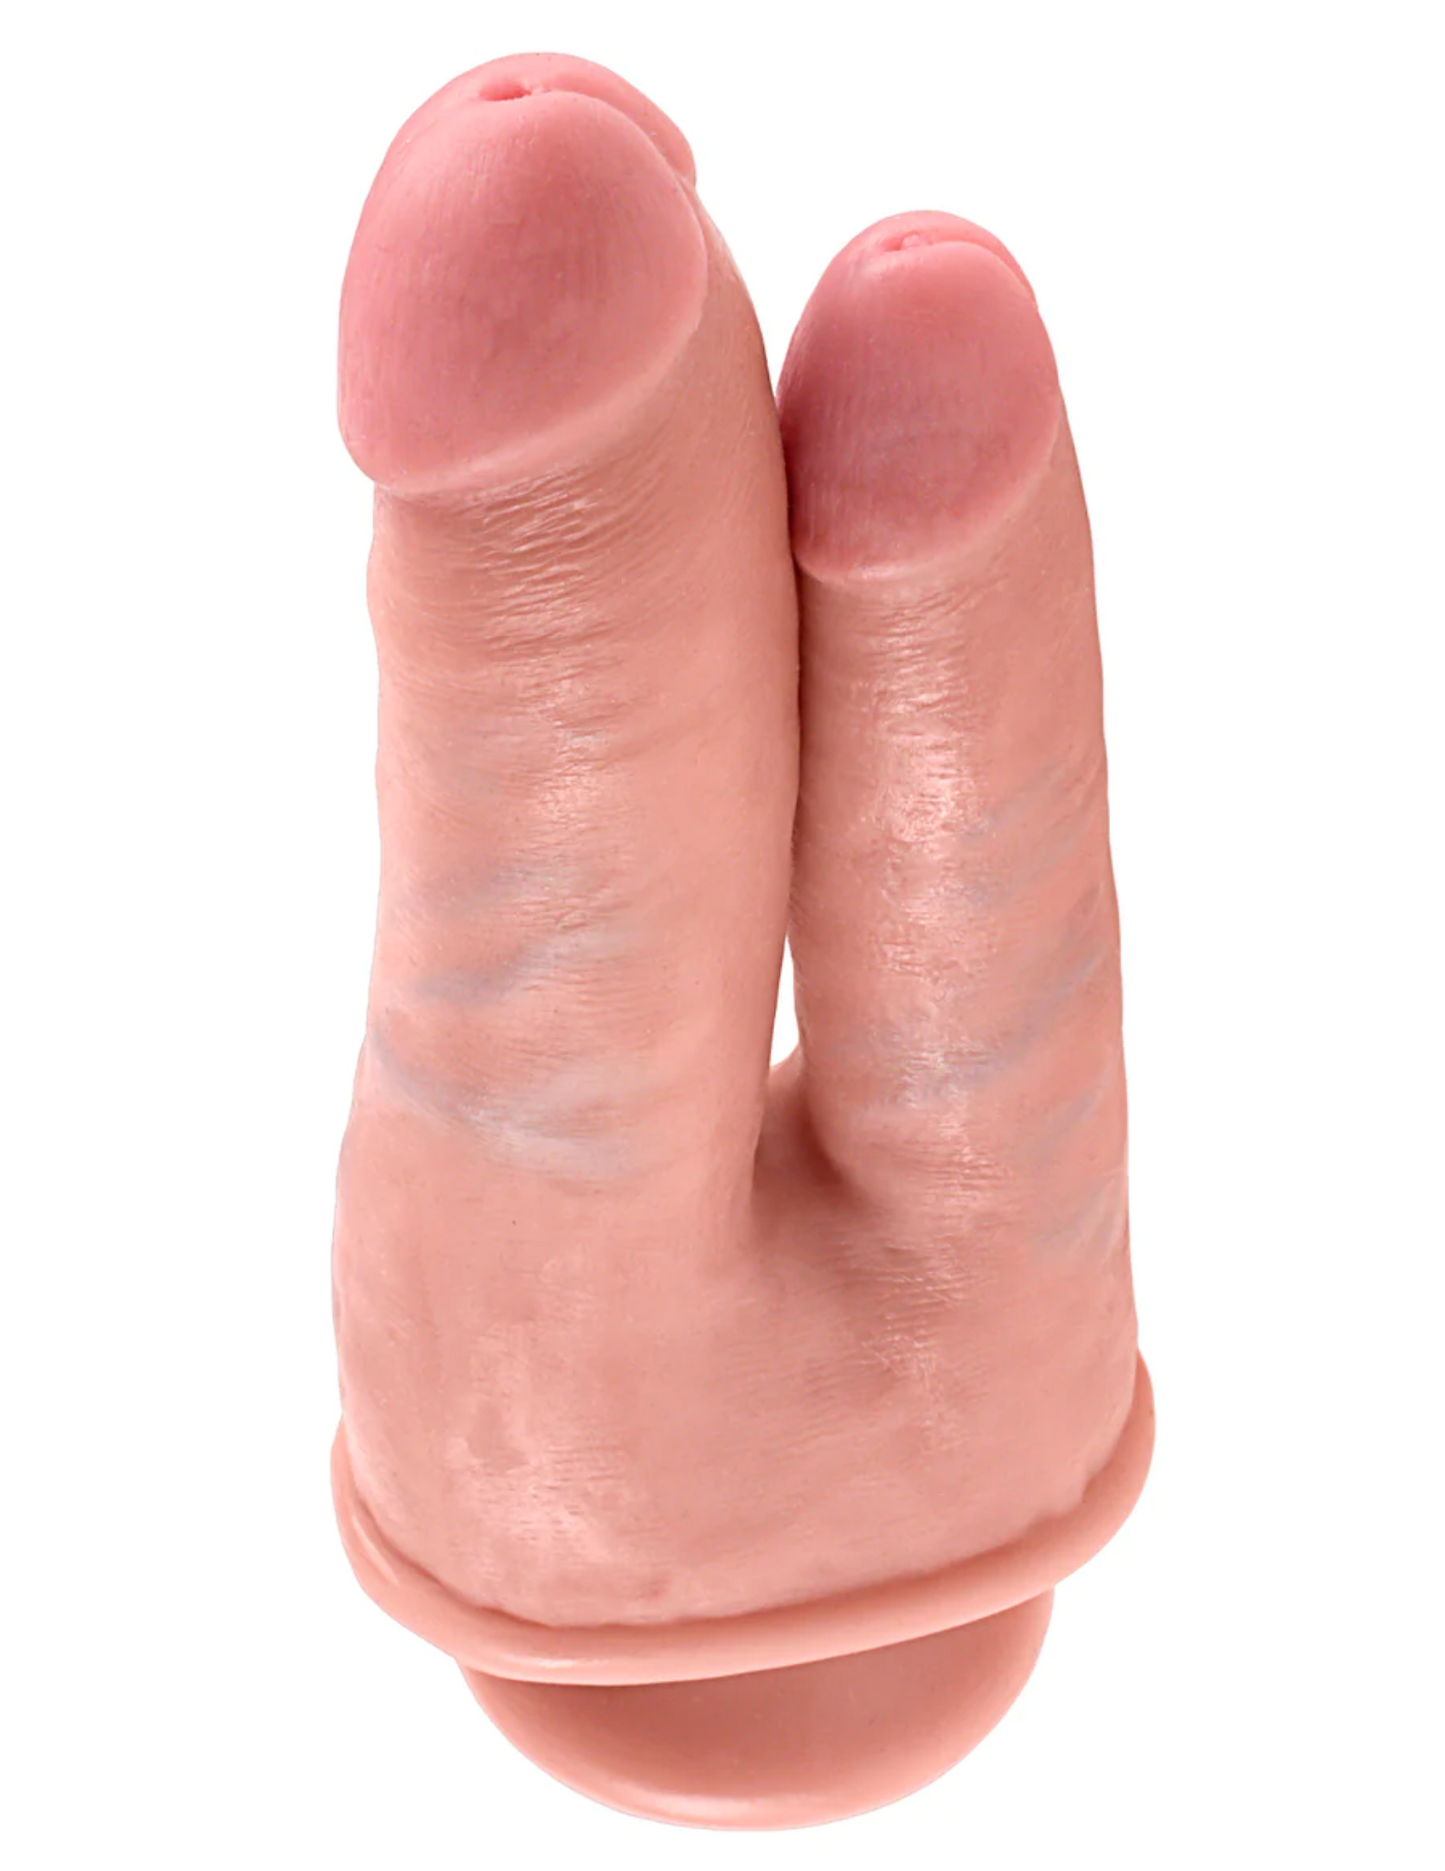 Close-up photo of the King Cock Double Penetrator Dildo from Pipedreams (vanilla) shows of its 2 realistic heads and skin-like texture.